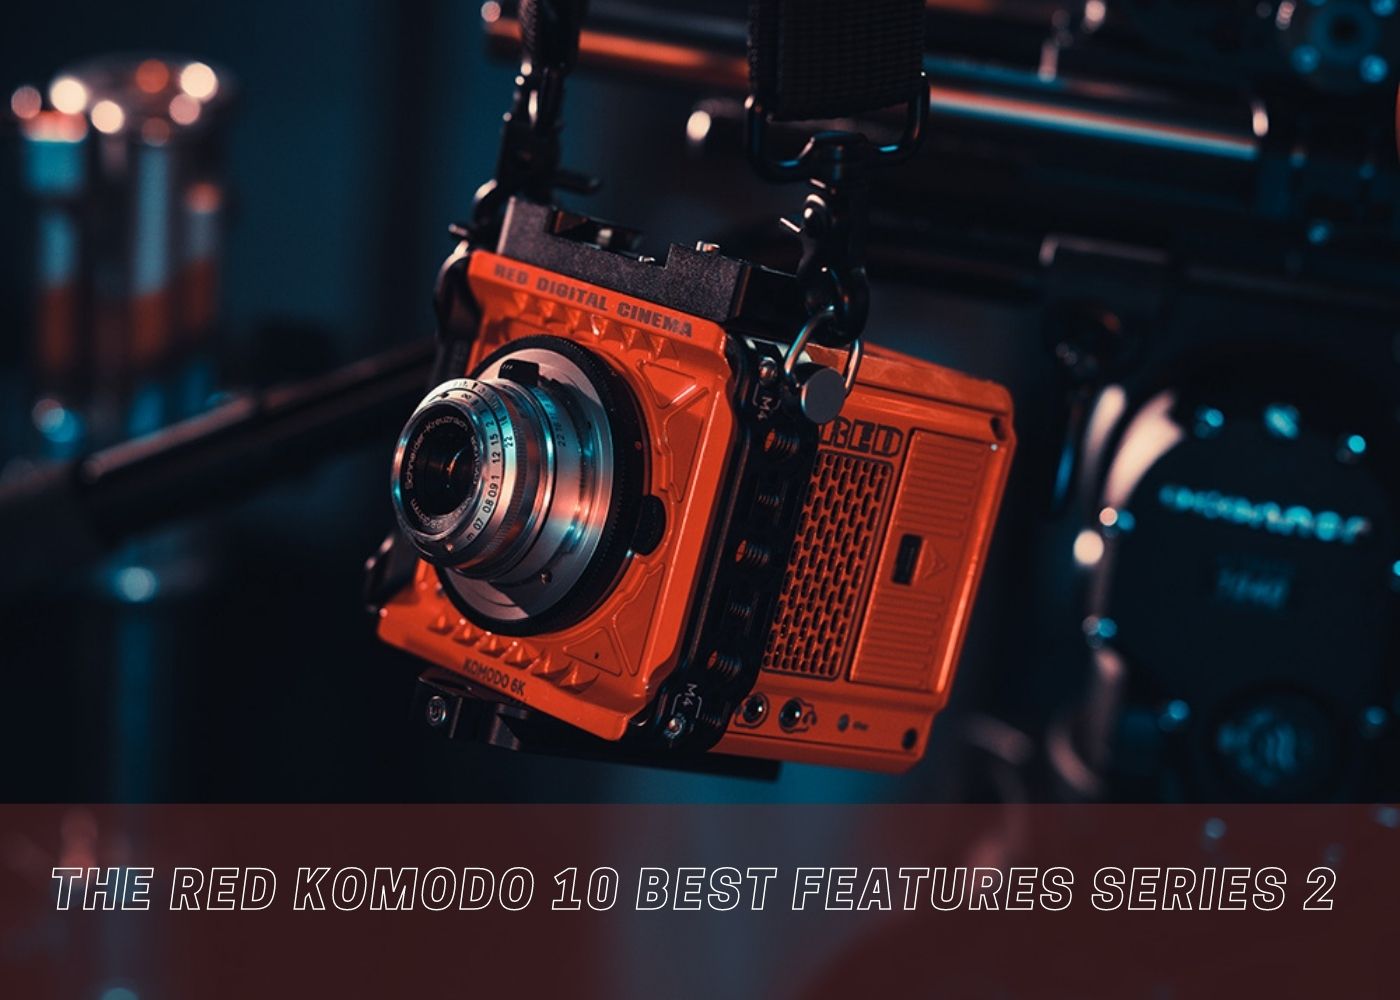 The RED Komodo 10 Best Features Series 2 